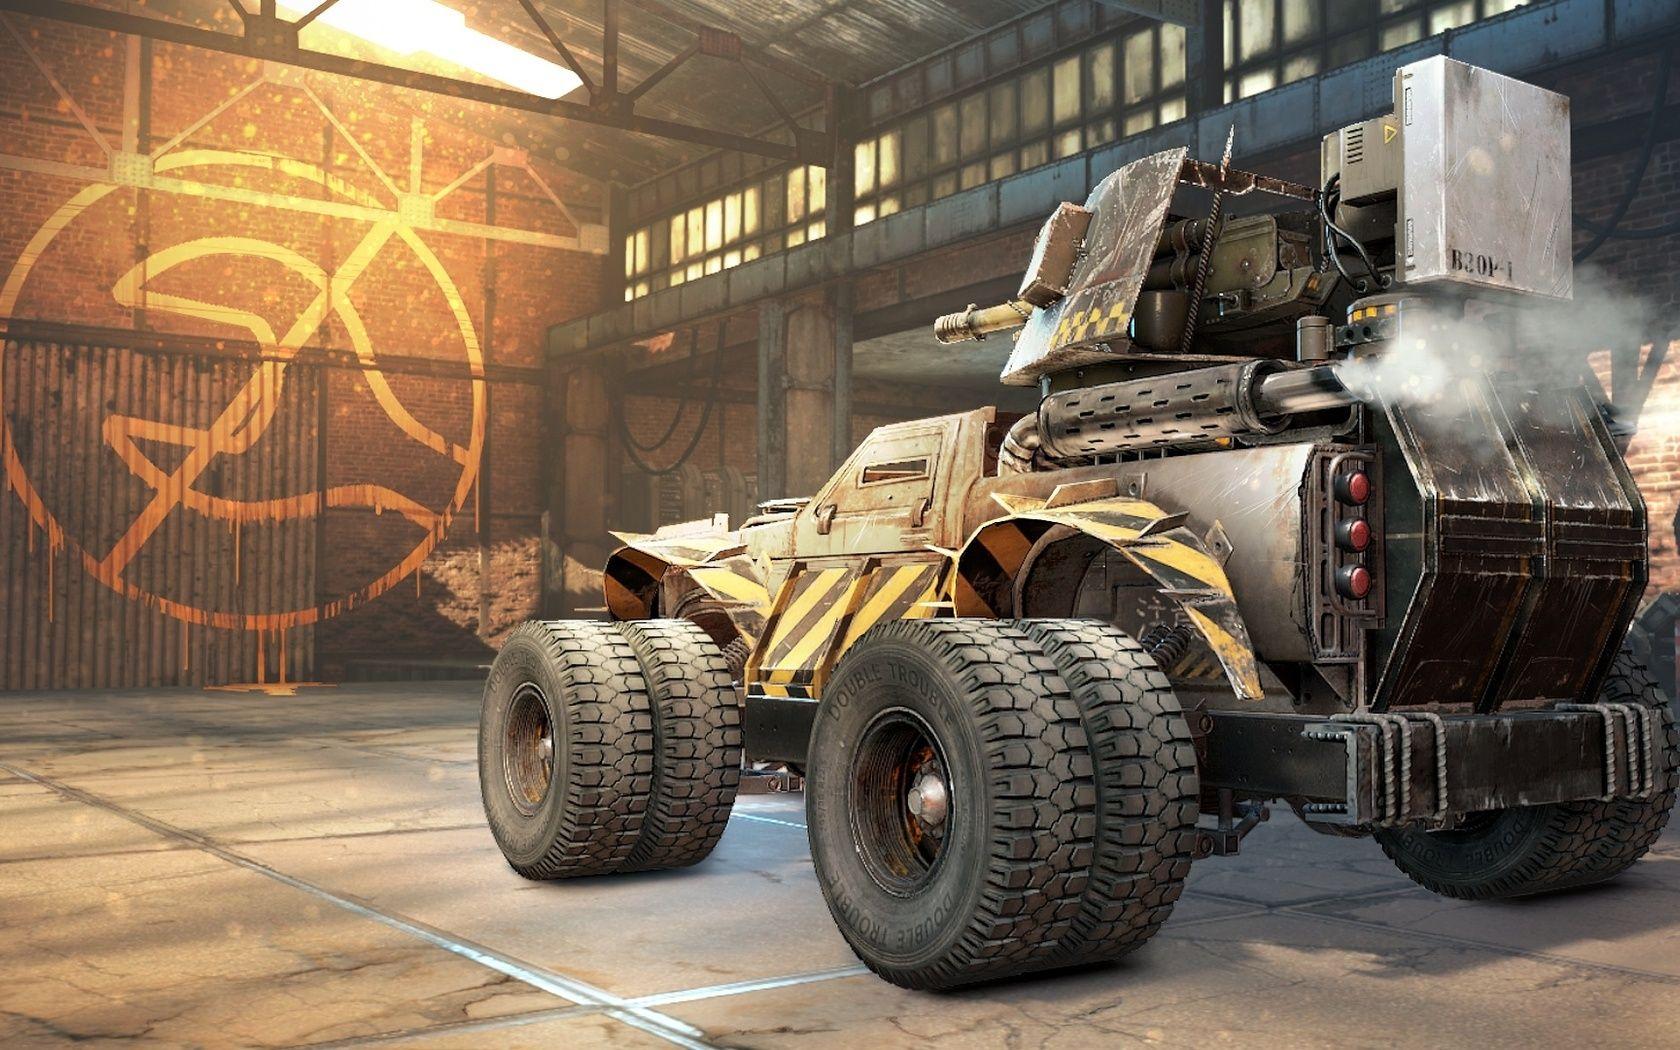 Video Game Background, Crossout Video Game Vehicle, Video